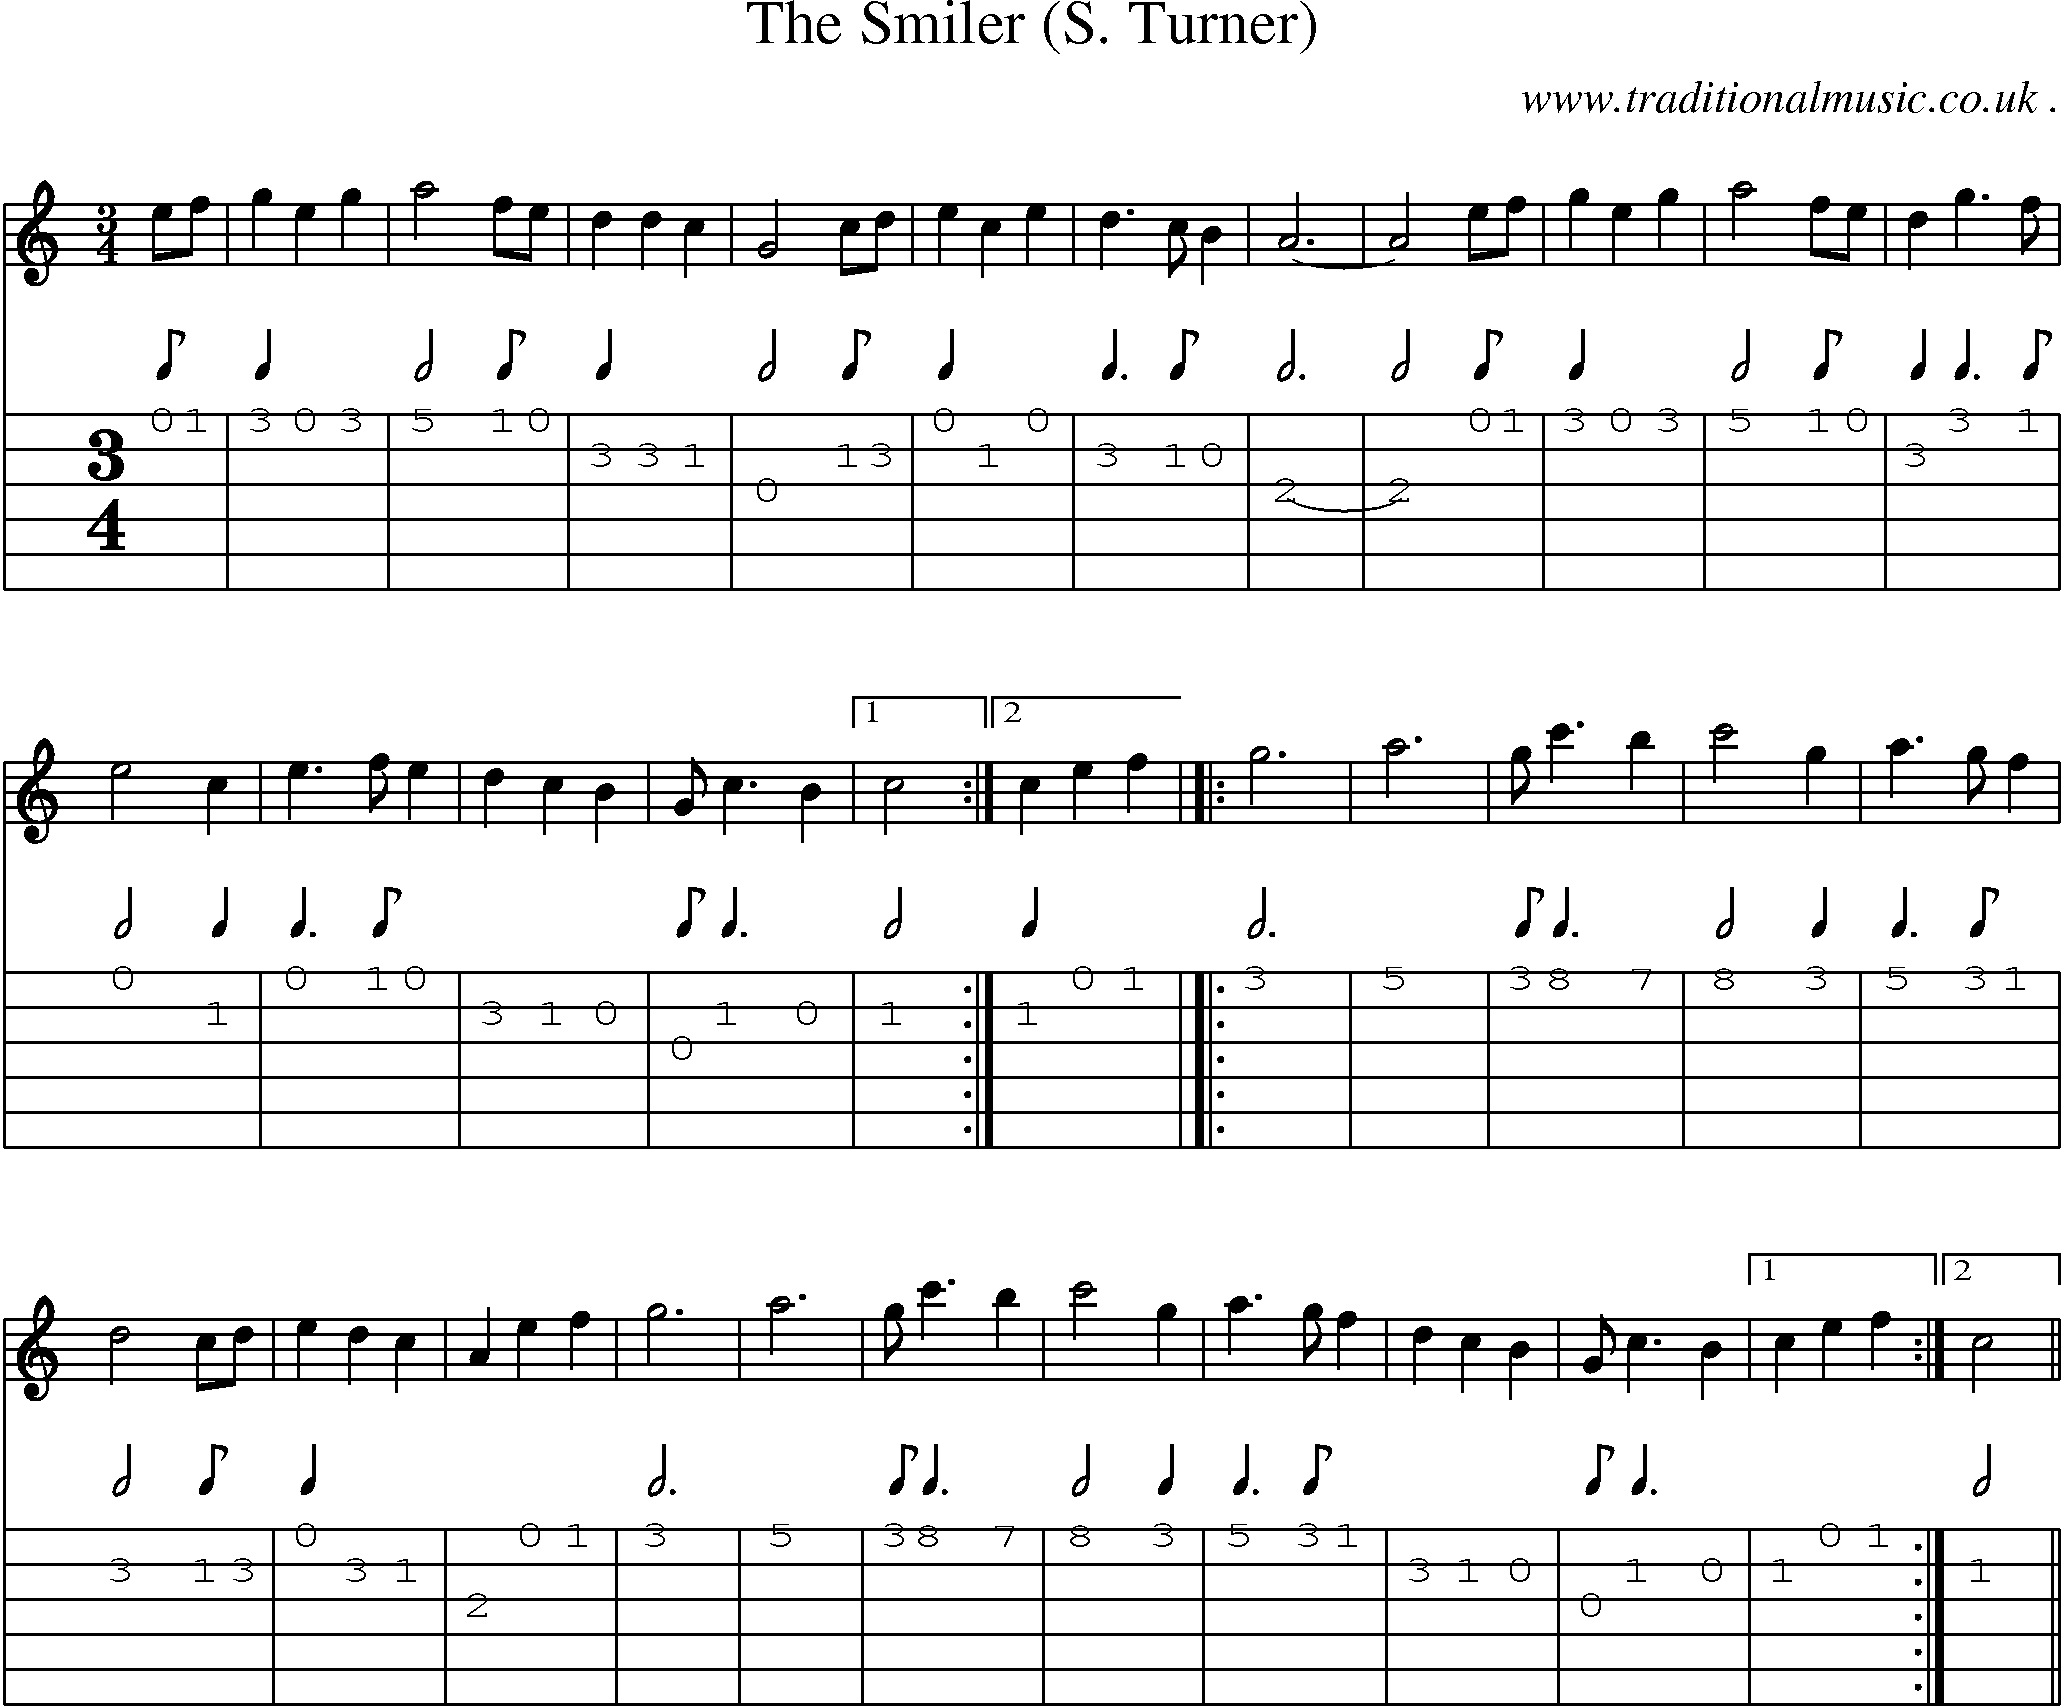 Sheet-Music and Guitar Tabs for The Smiler (s Turner)